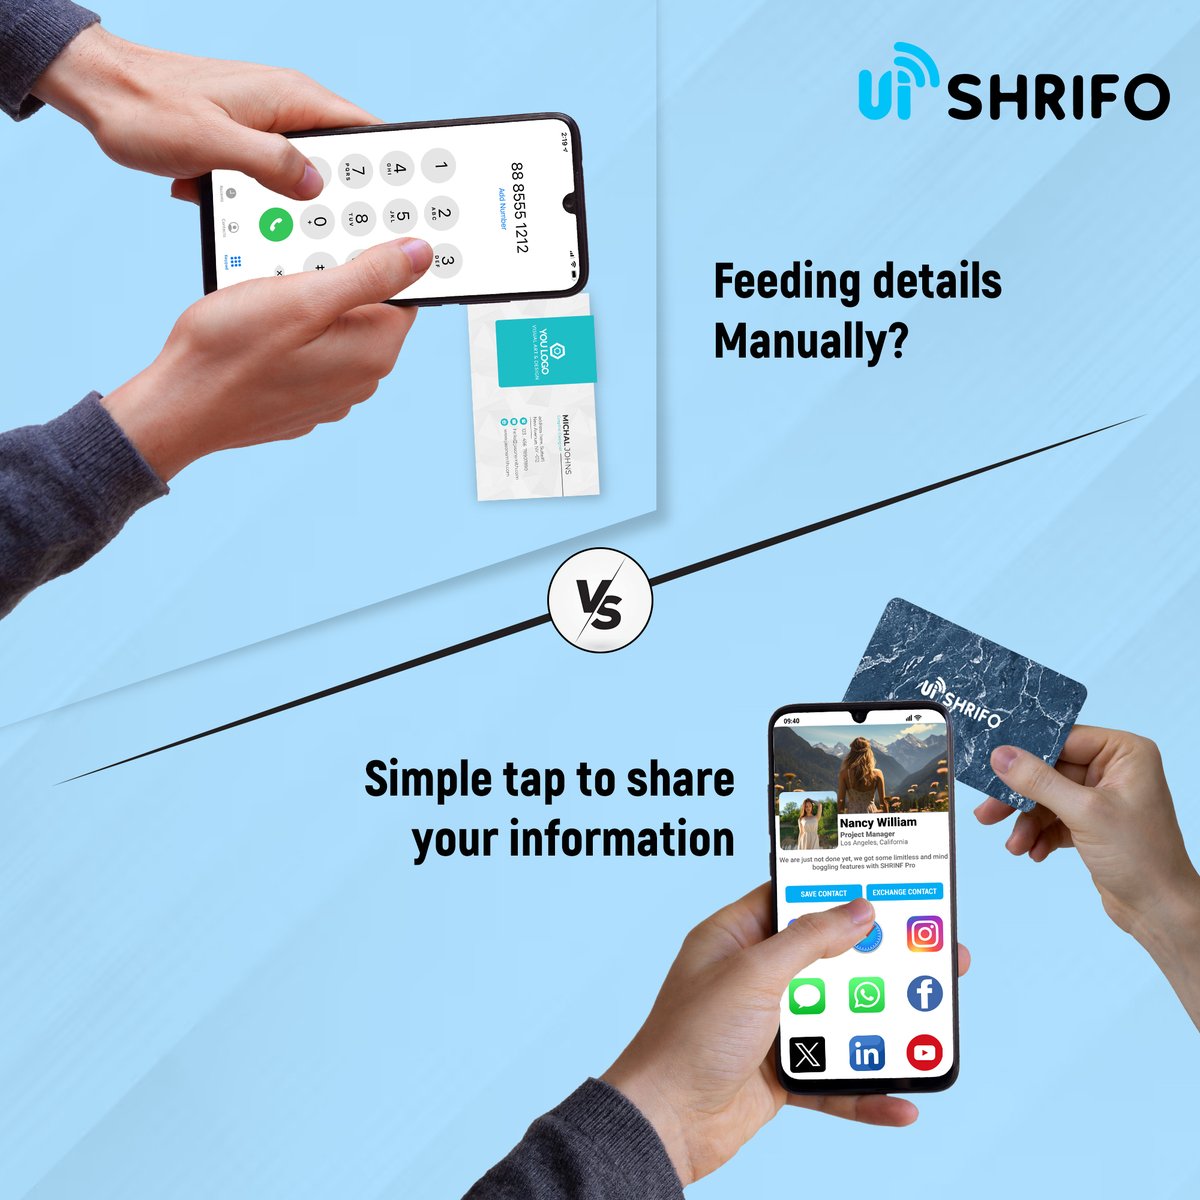 Say goodbye to manual feeding and hello to seamless sharing! With just a tap, you can effortlessly share your information
#SimplifyYourLife #smartbusinesscard #bestbusinesscards #contactlesscard #digitalbusinesscard #nfcbusinesscard #nfctechnology #businesscard #networking